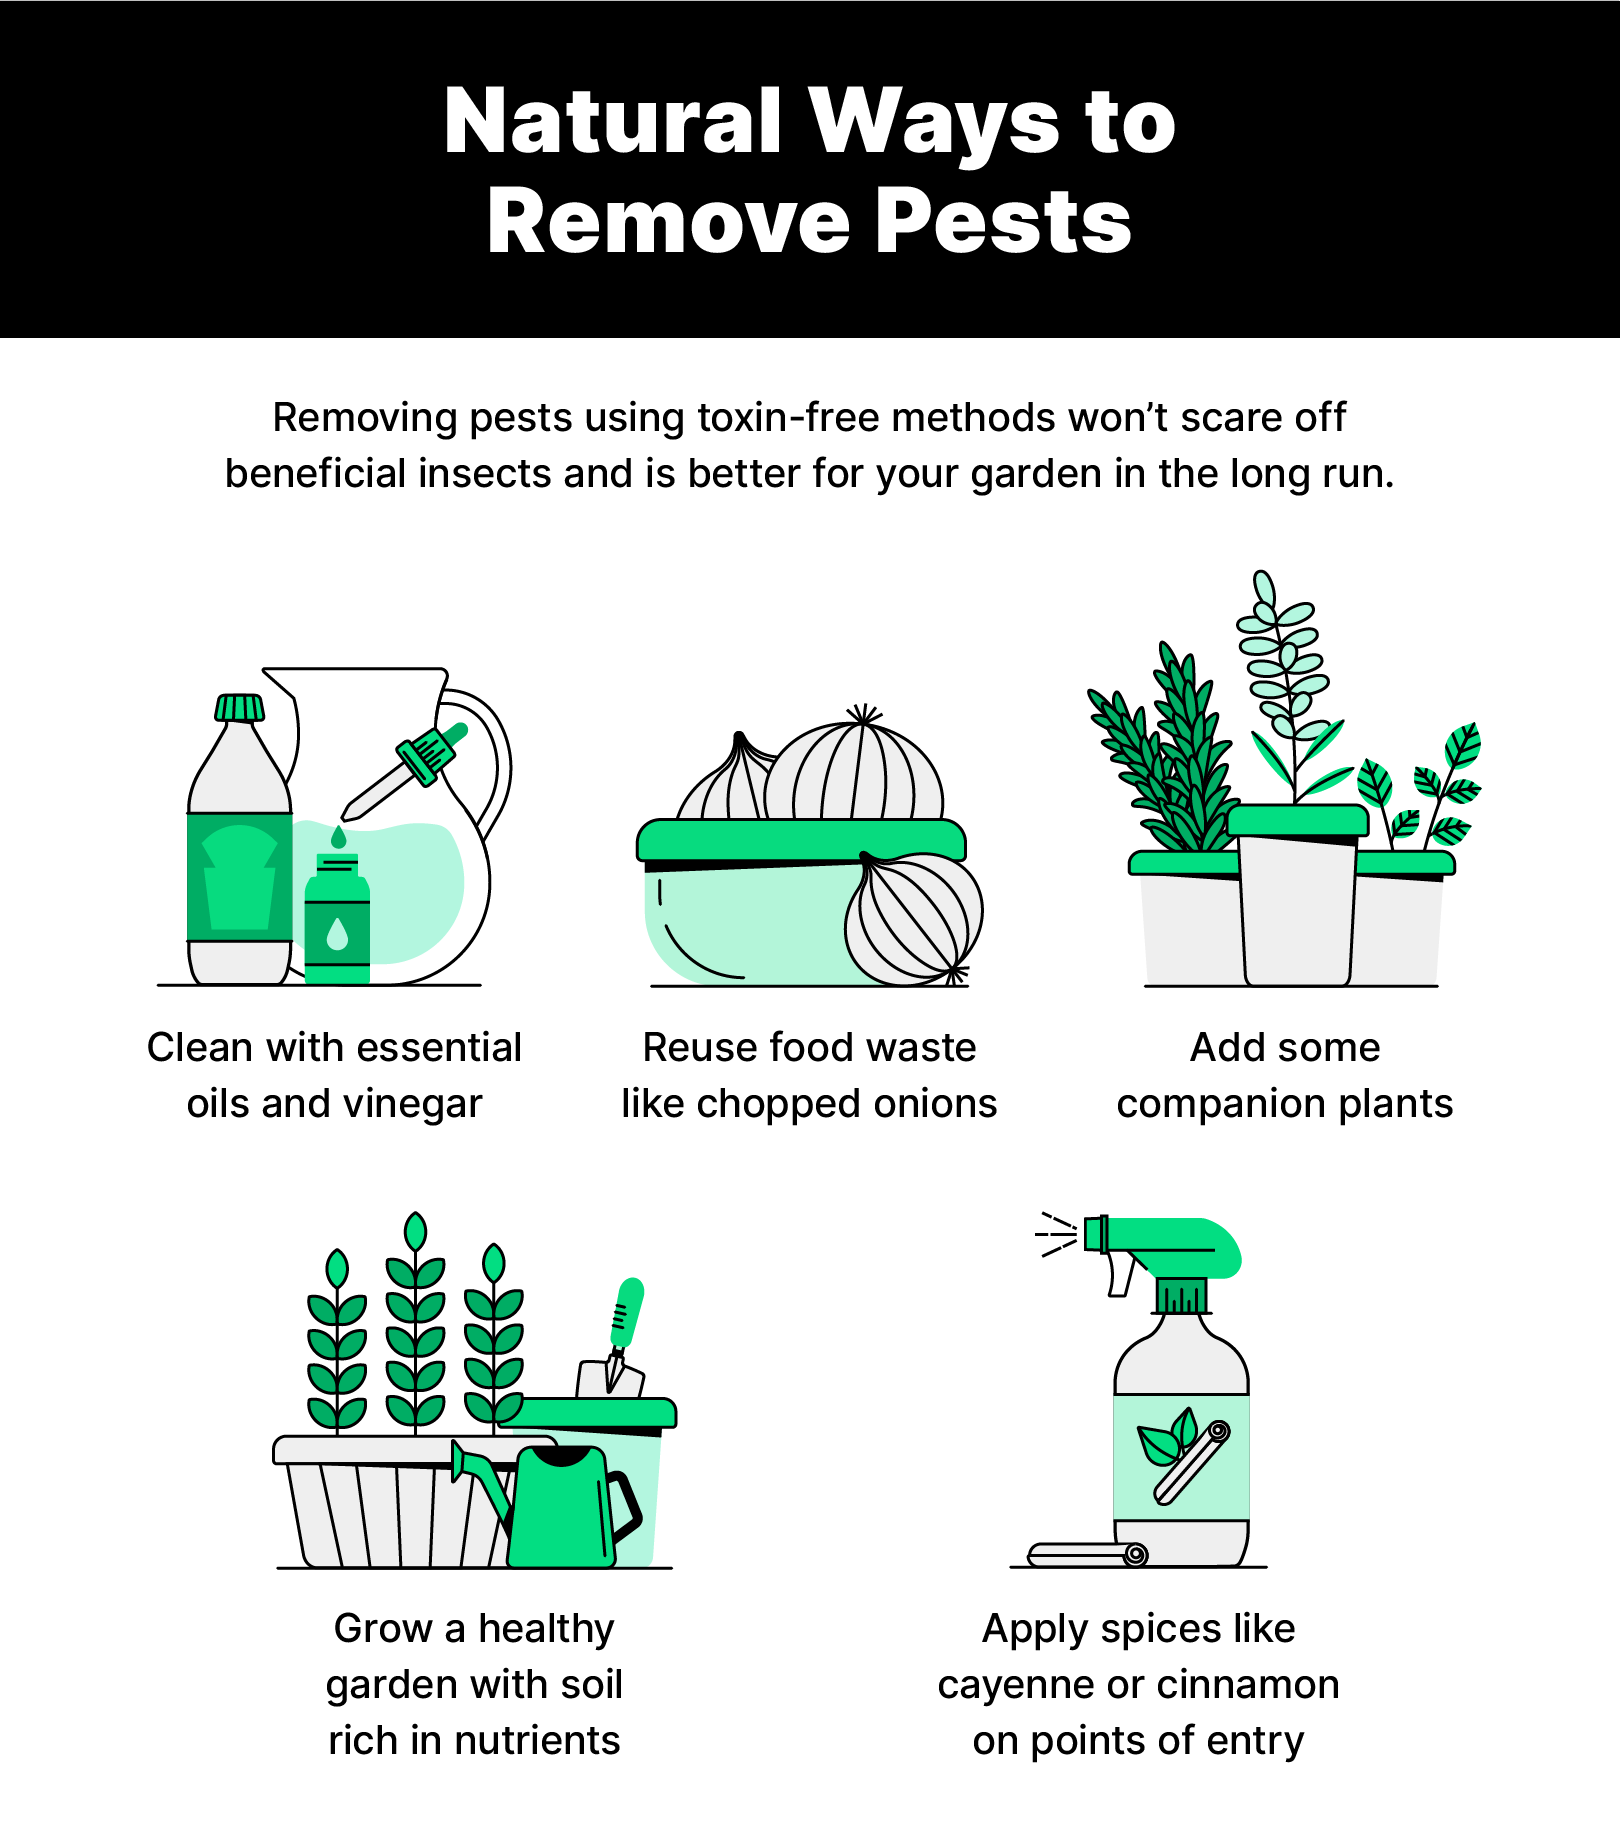 Illustrations and copy on natural ways to remove pests